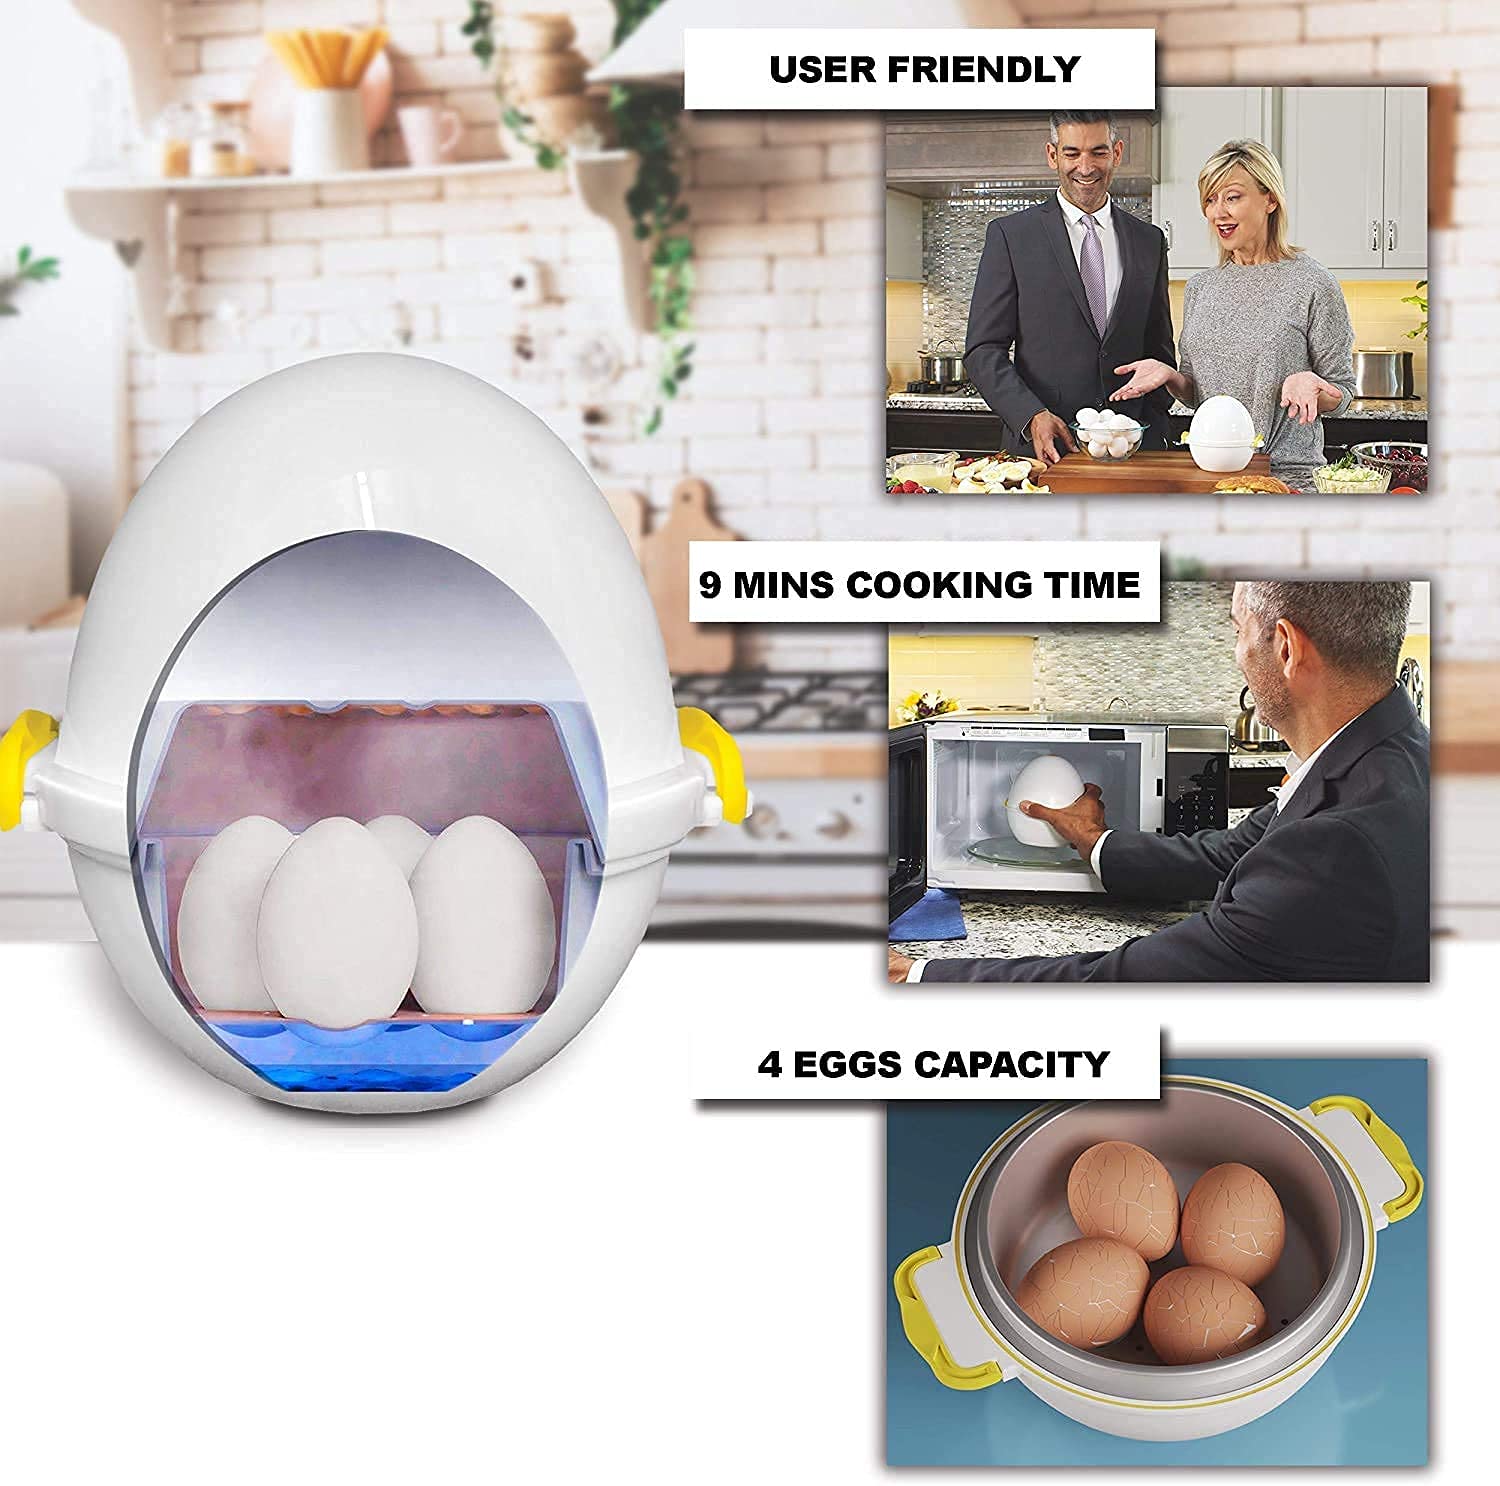 EGG POD by Emson Microwave Hardboiled Egg Maker, Cooker, Boiler & Steamer, 4 Perfectly-Cooked Hard boiled Eggs in Under 9 minutes, Dishwasher Safe, Airtight and Warp Proof As Seen On TV Set of 2…